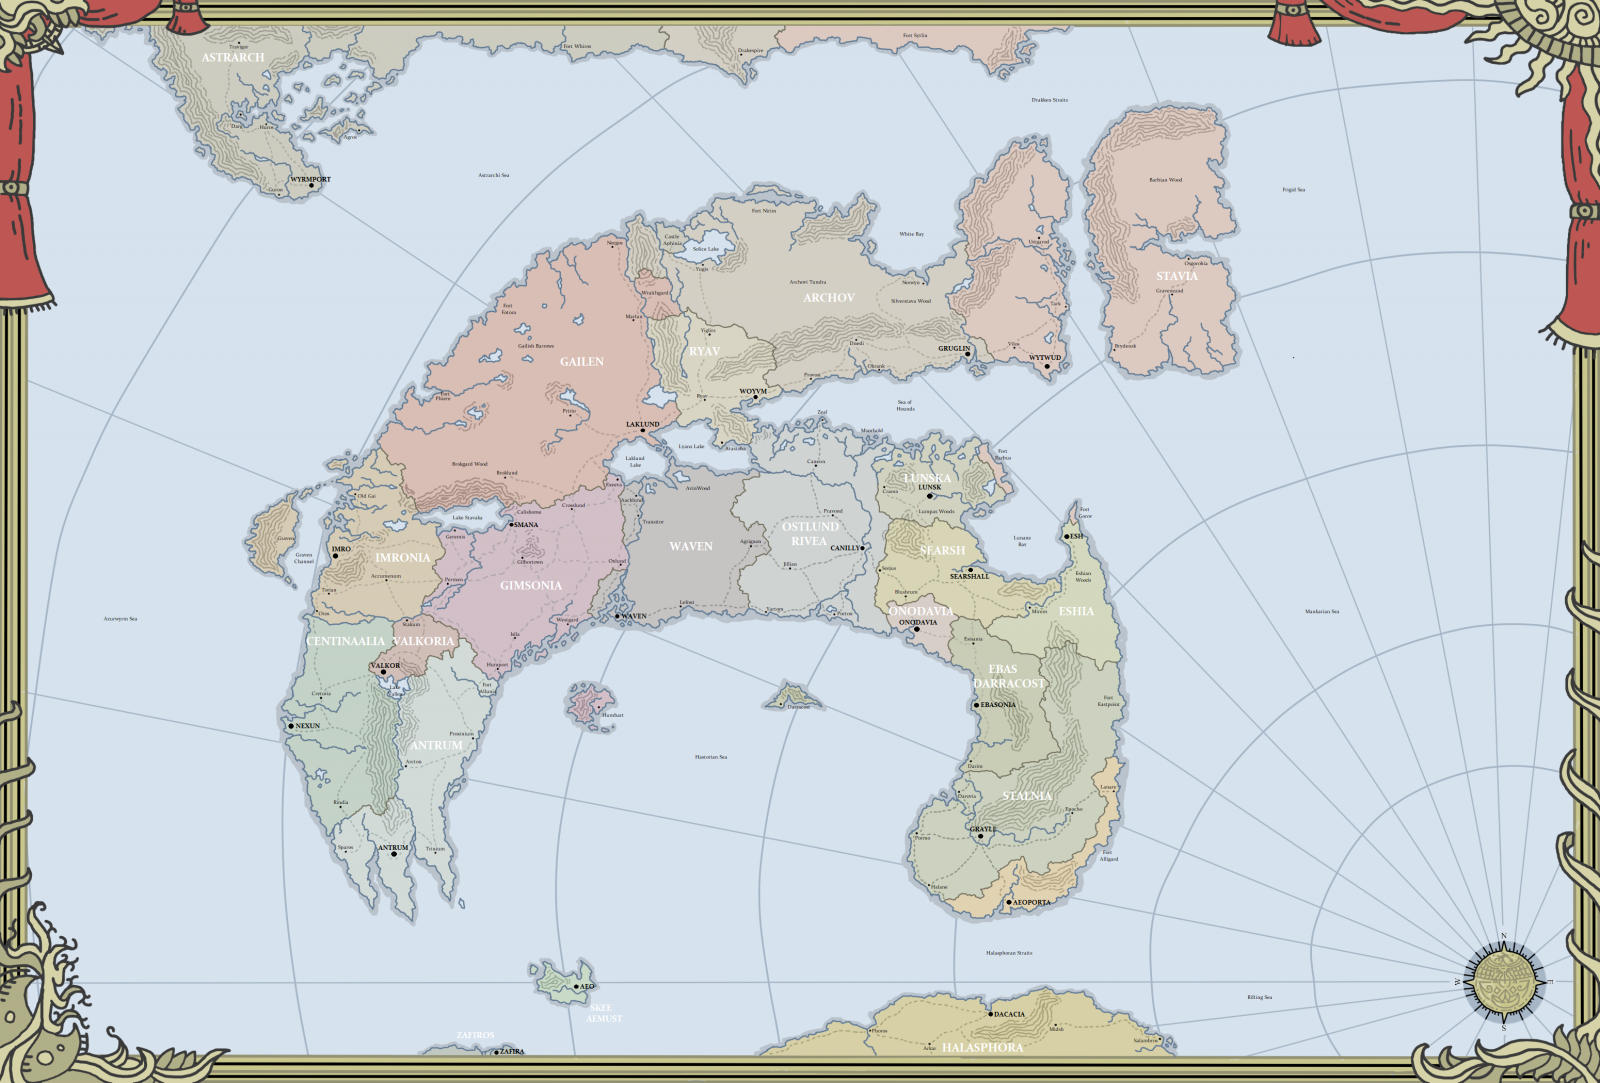 Aphals Borders, the 24th Age